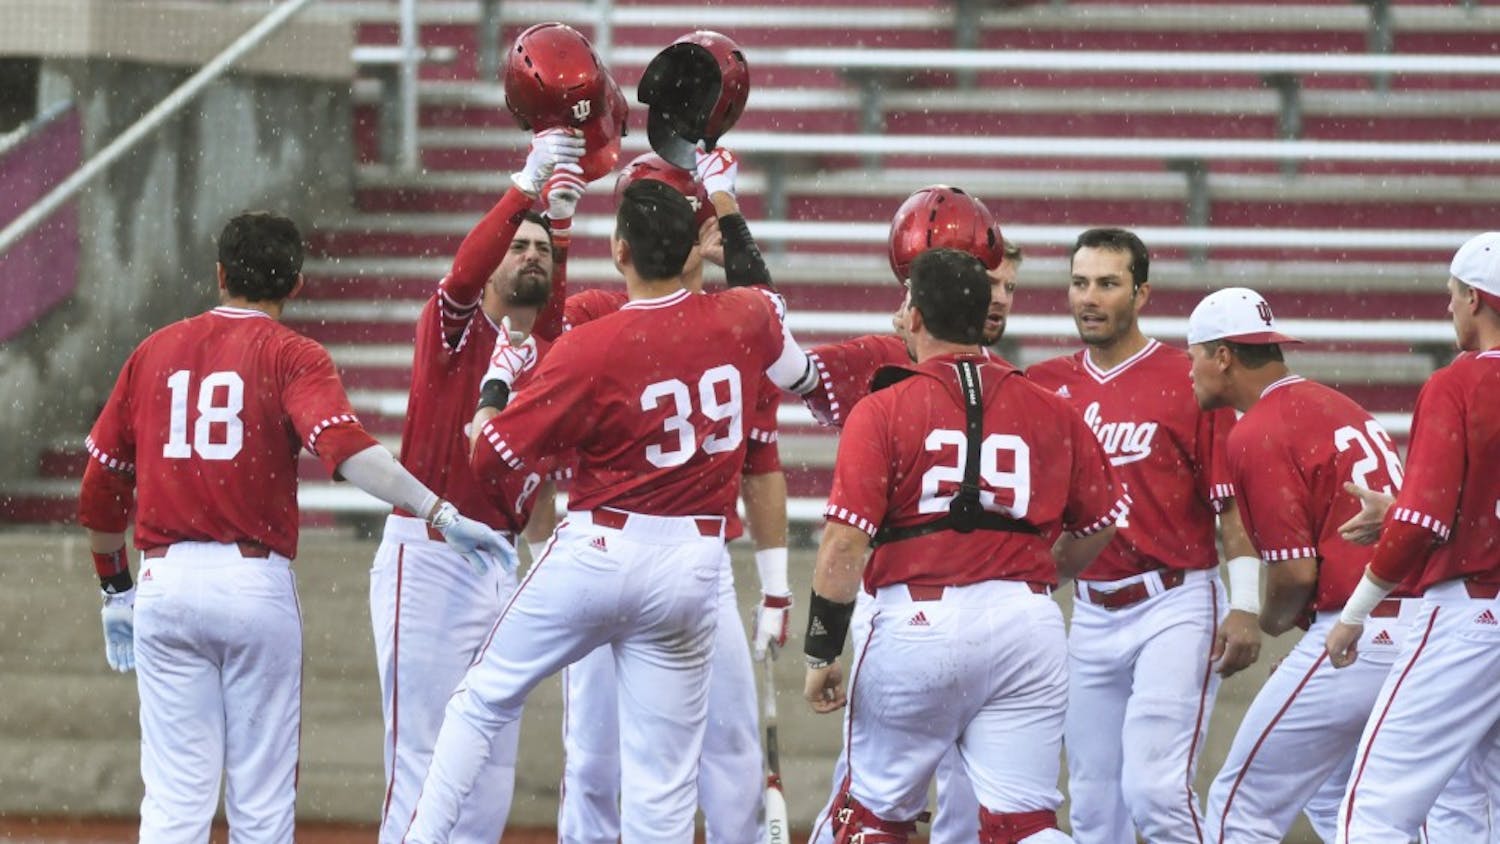 IU players meet senior outfielder Craig Dedelow at home plate after he hit a grand slam in the seventh inning of a game against Maryland on Sunday. IU won 6-3.